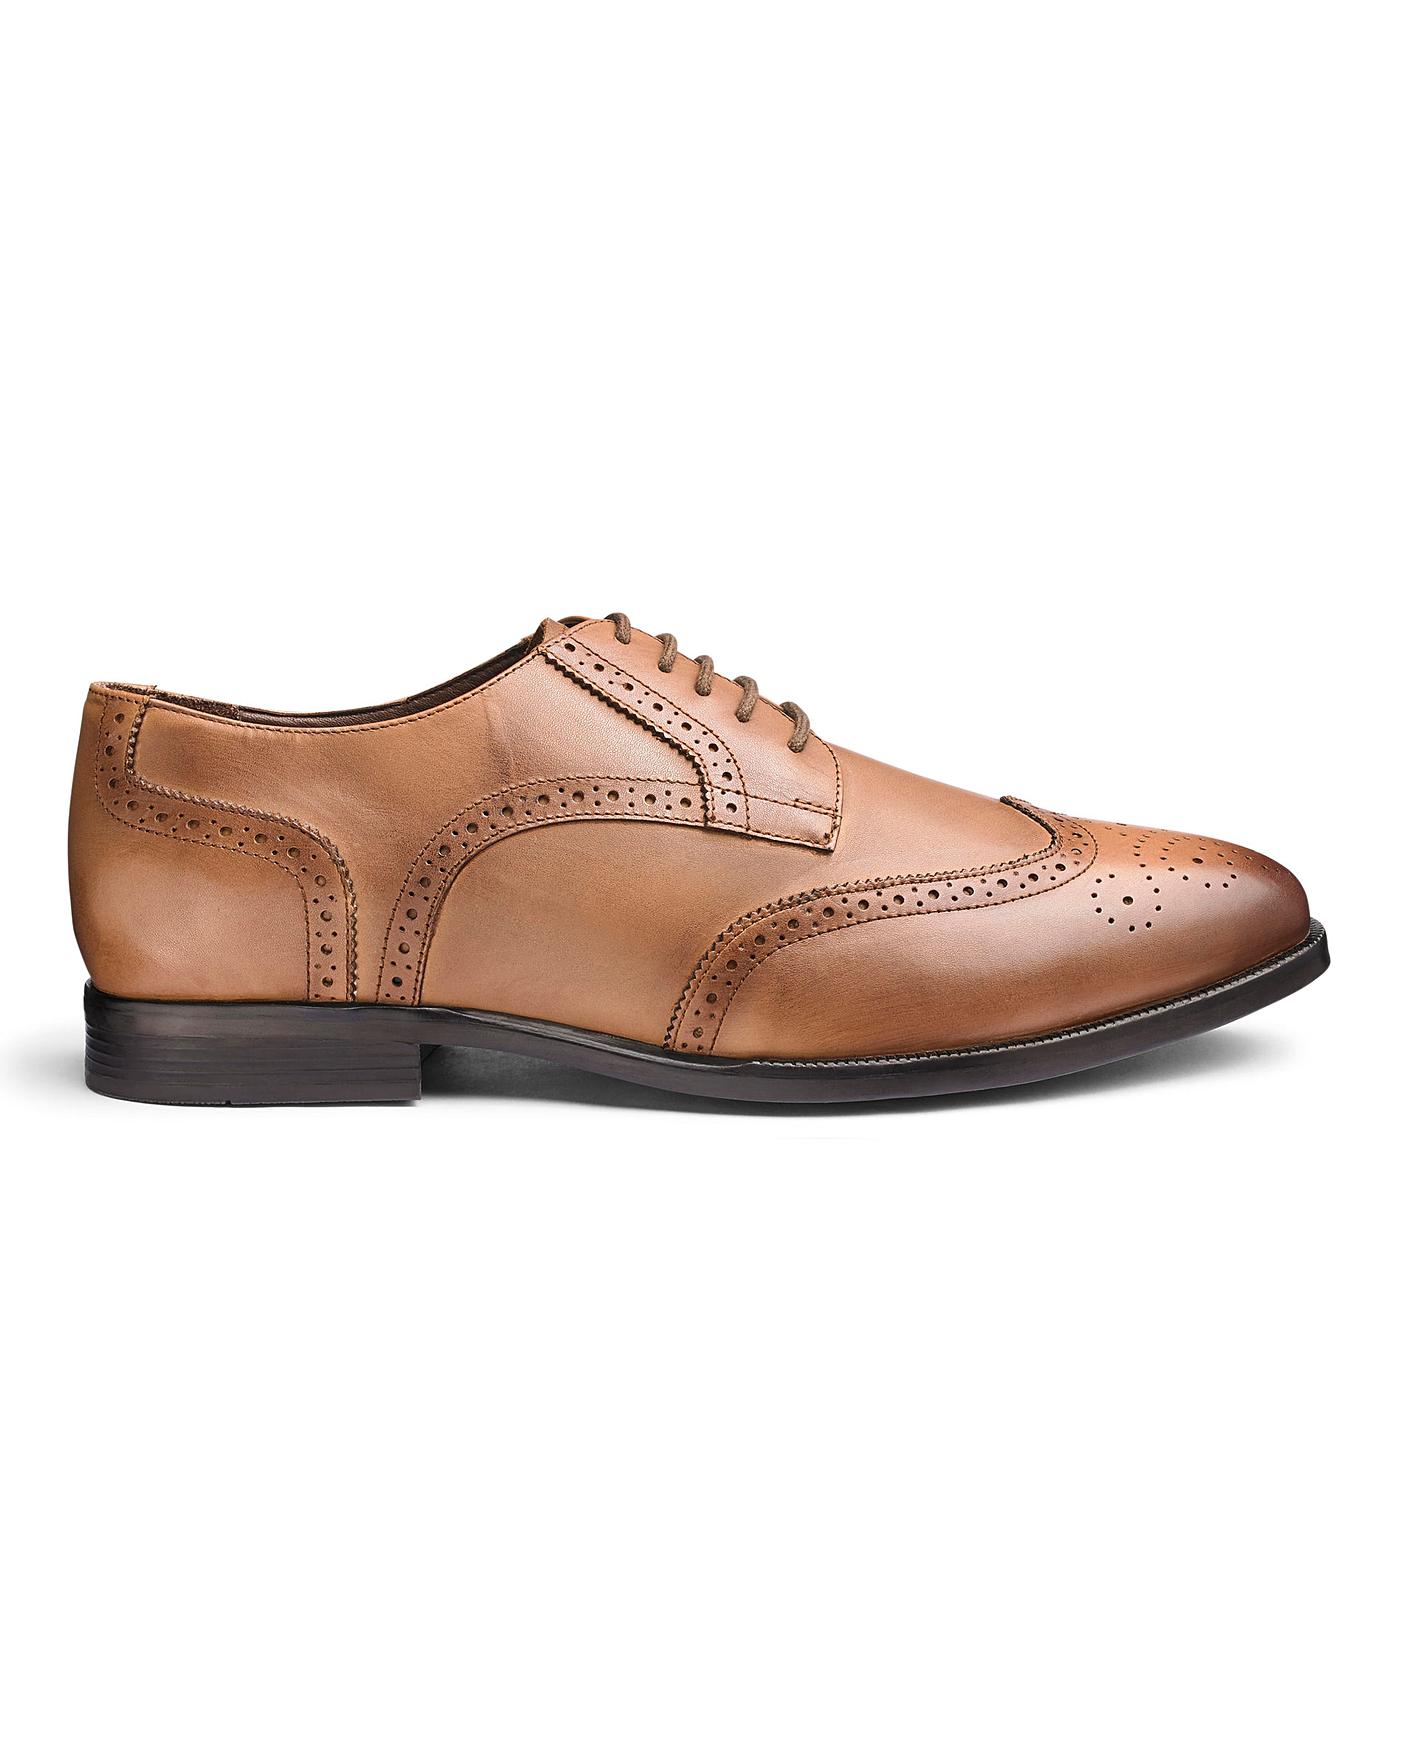 Leather Formal Brogues Extra Wide Fit